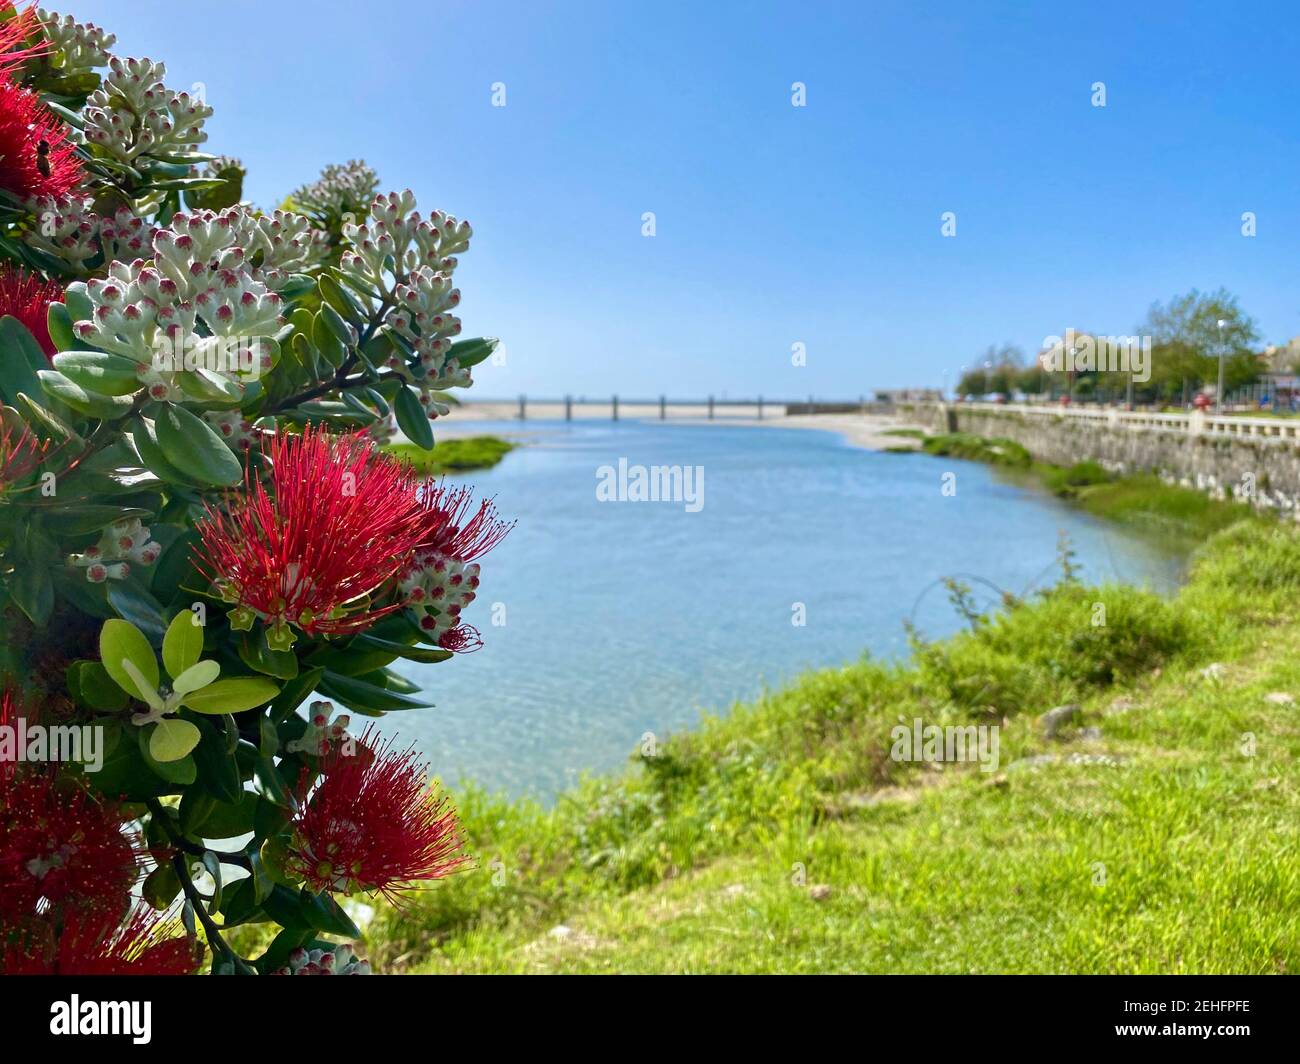 callistemon, flowering tree overlooking the river and the city of Port Stock Photo